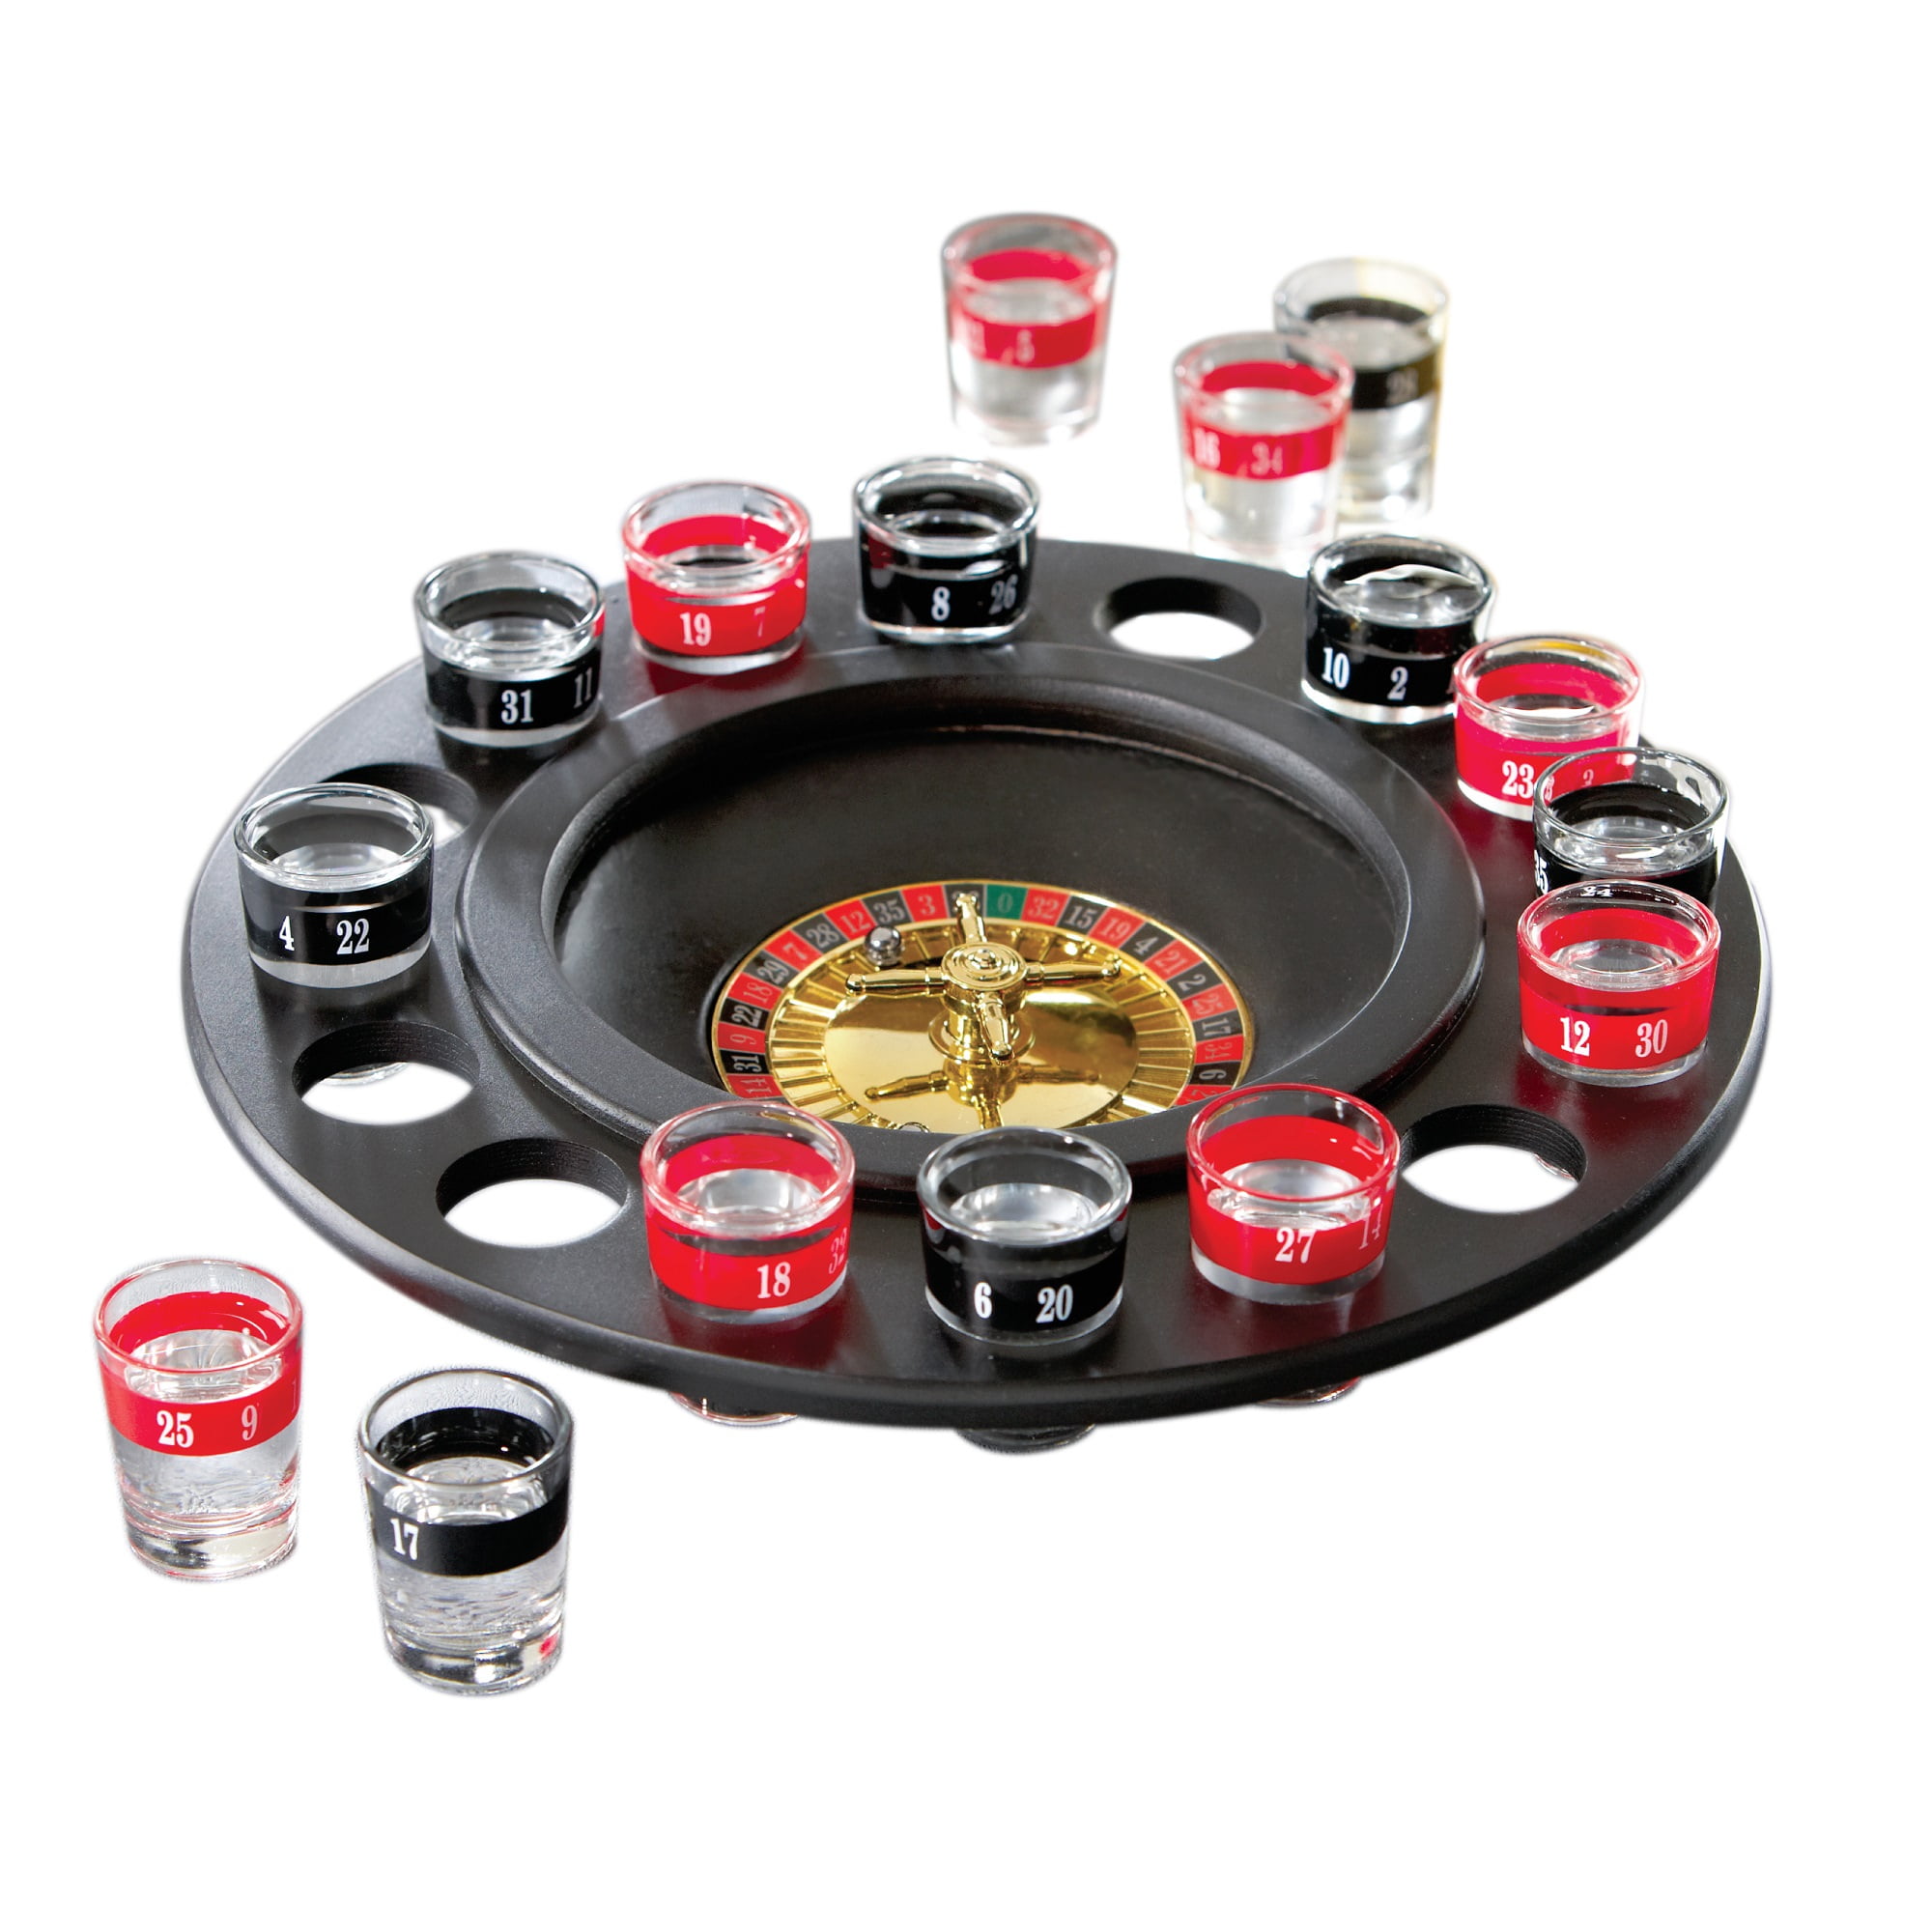 10" Drinking Roulette Wheel Game Set Casino Fathers Day Dorms Coworker Gift 